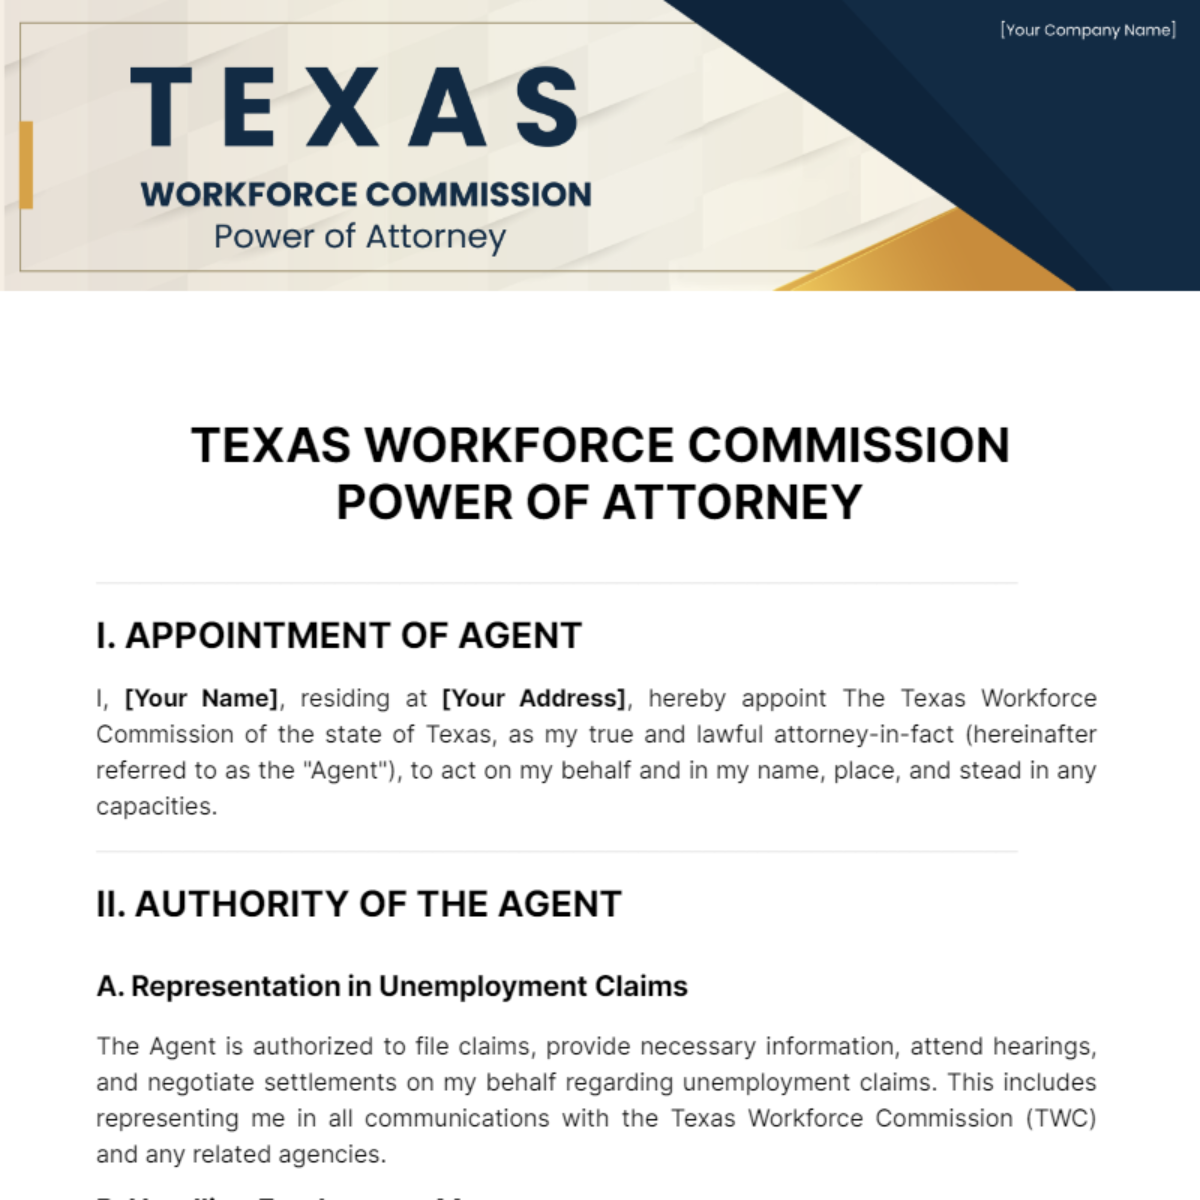 Free Texas Workforce Commission Power of Attorney Template